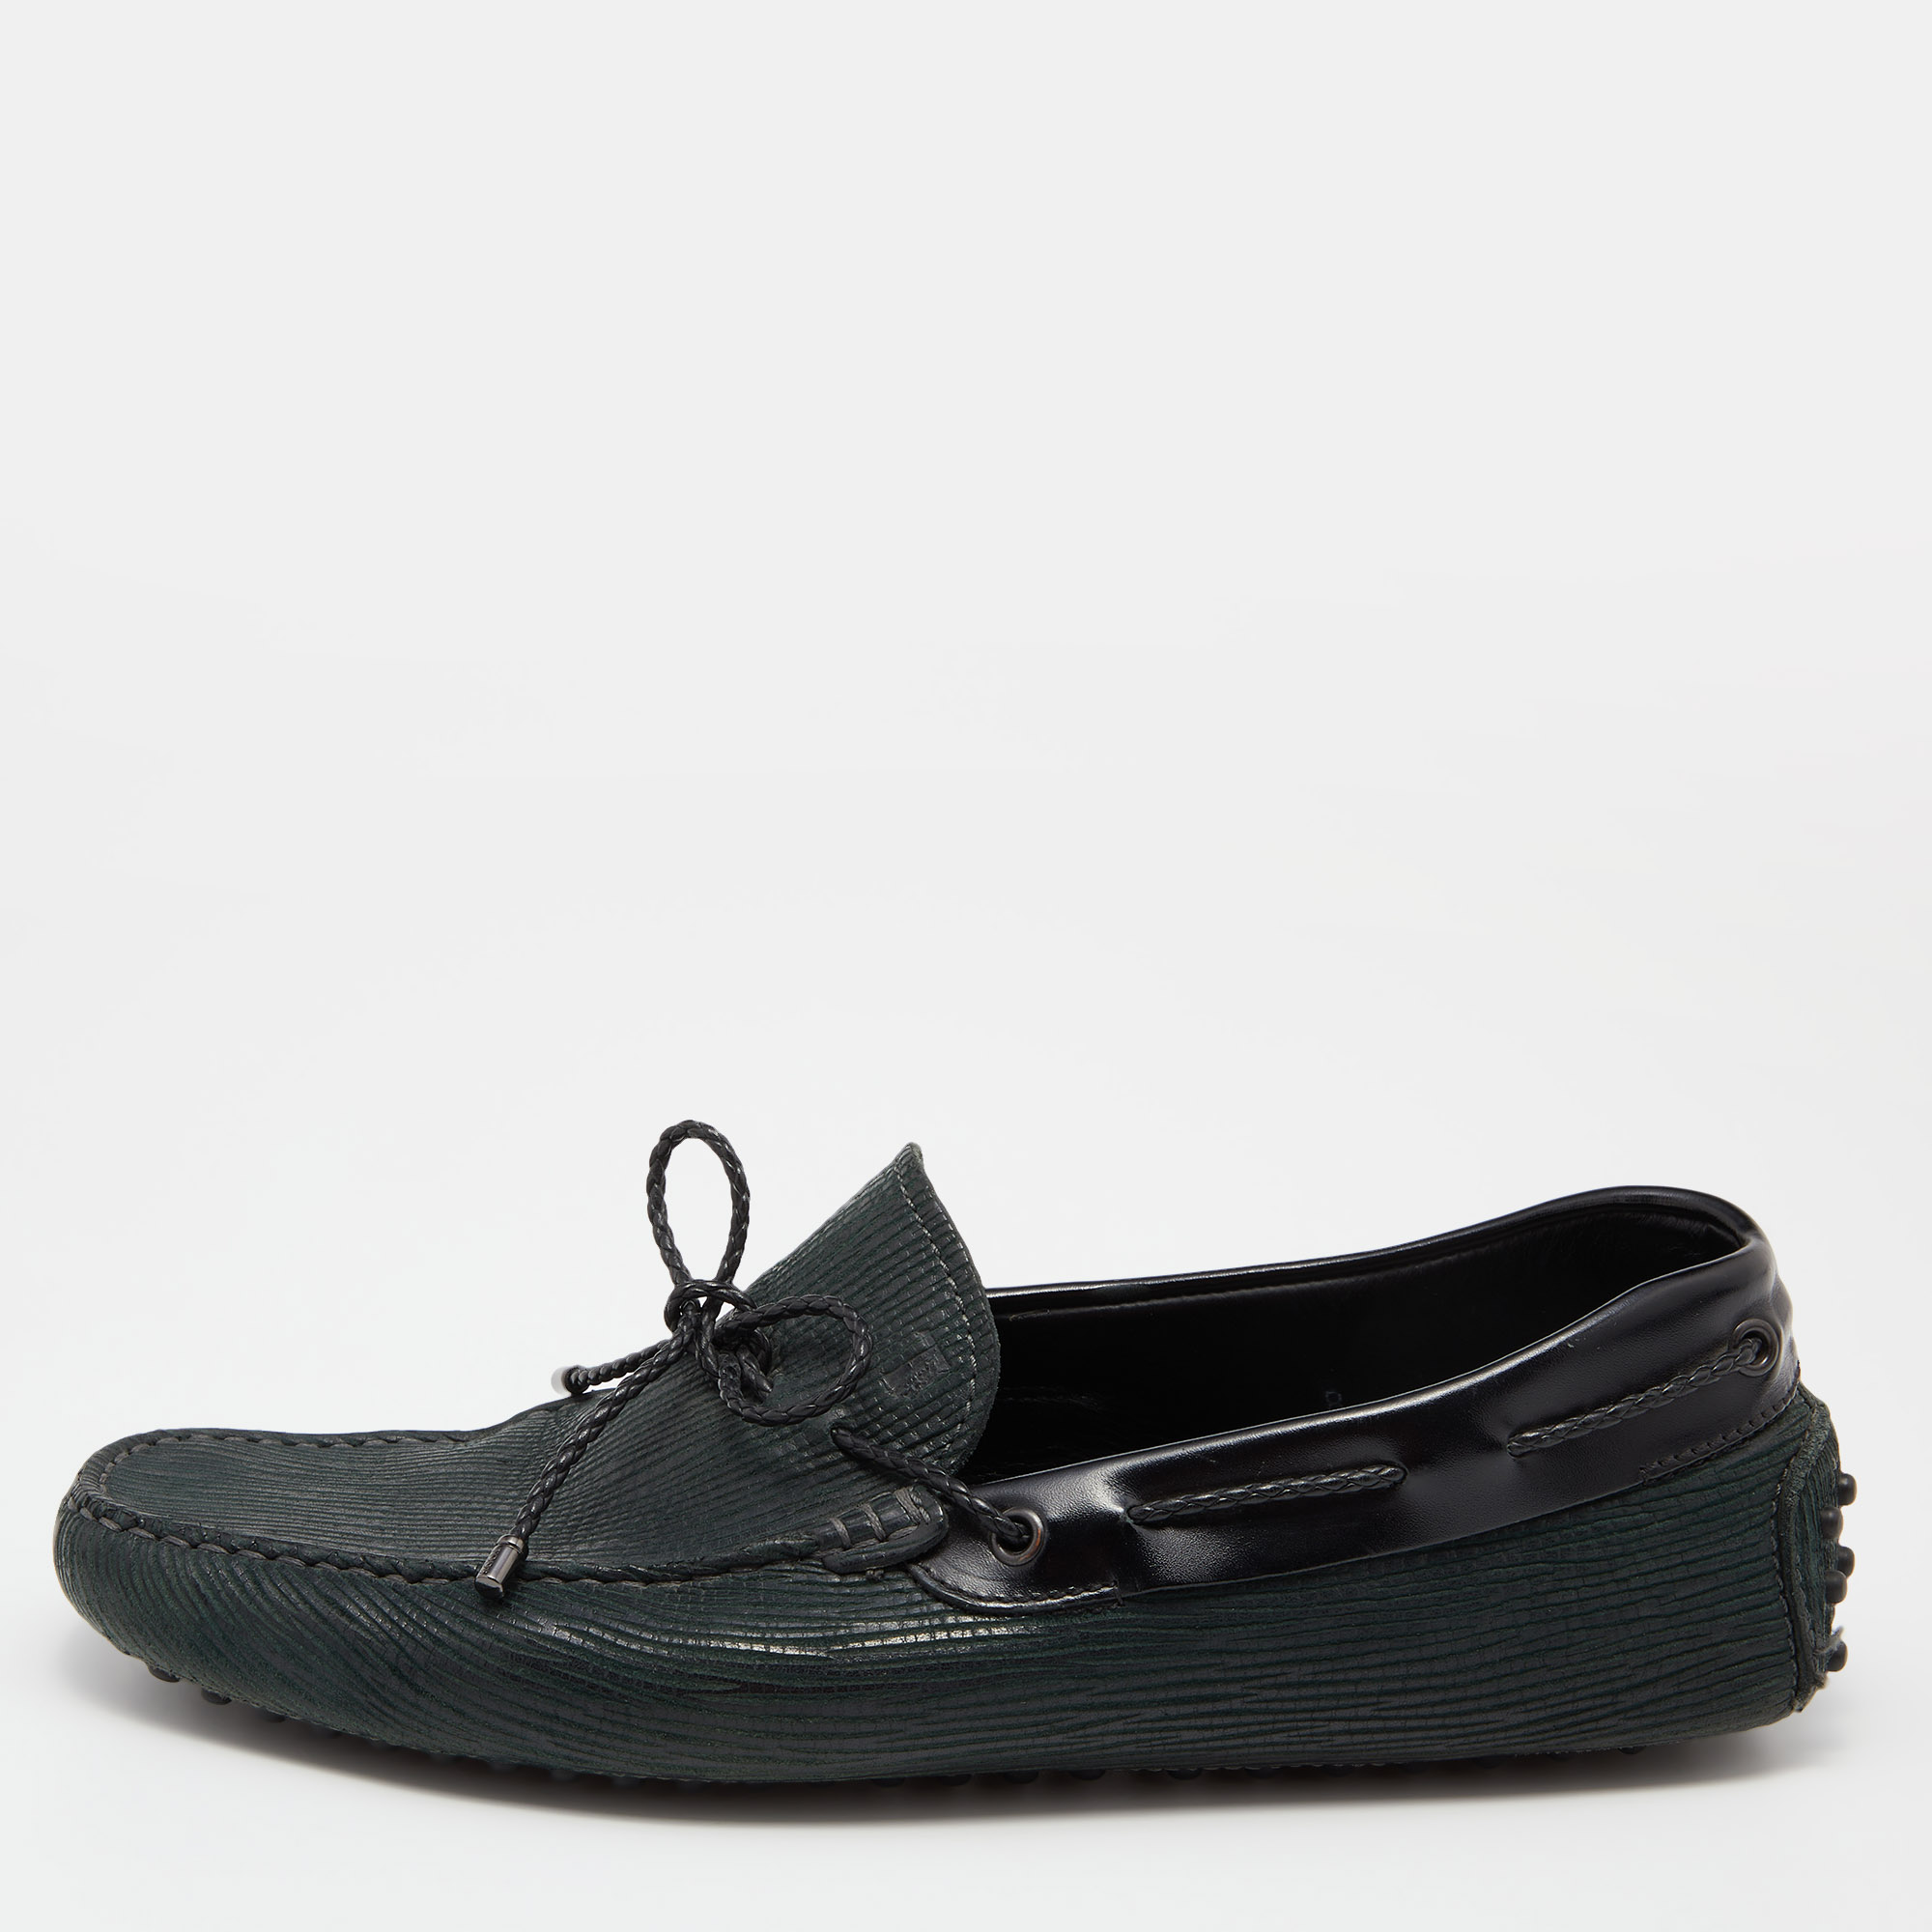 Tod's Black/Green Leather Bow Slip On Loafers Size 42